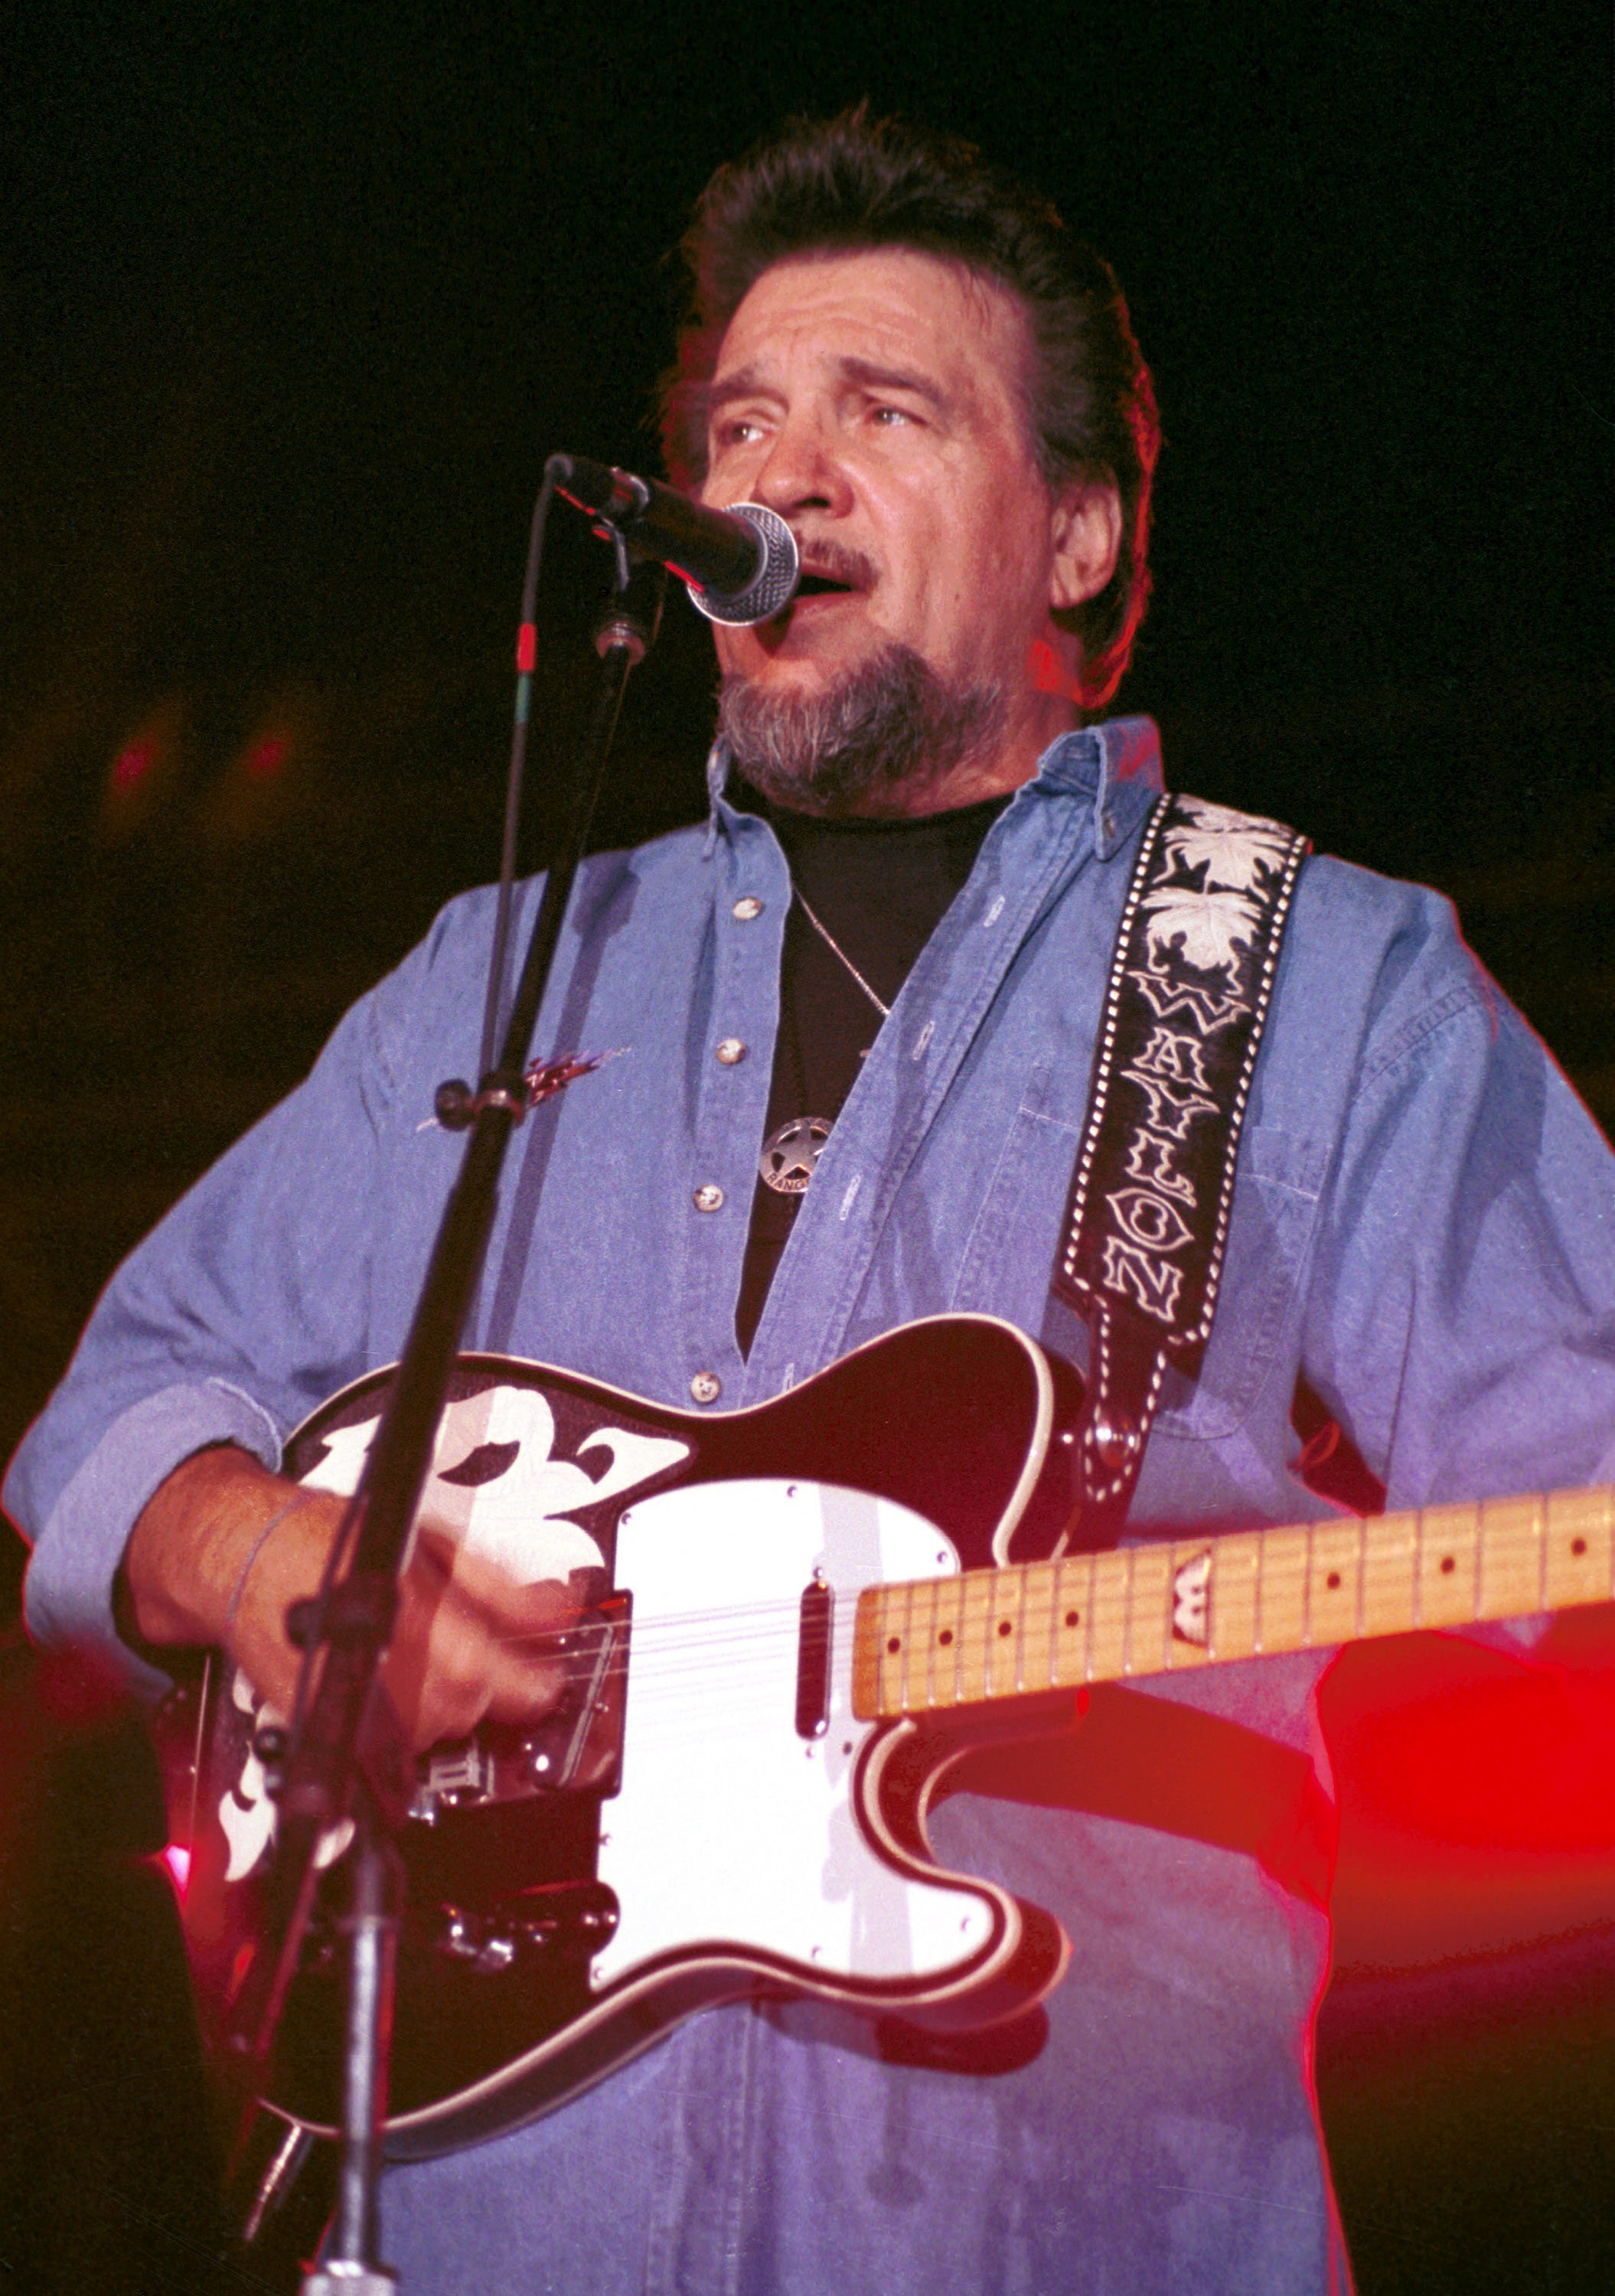 Waylon Jennings on stage - Getty Images